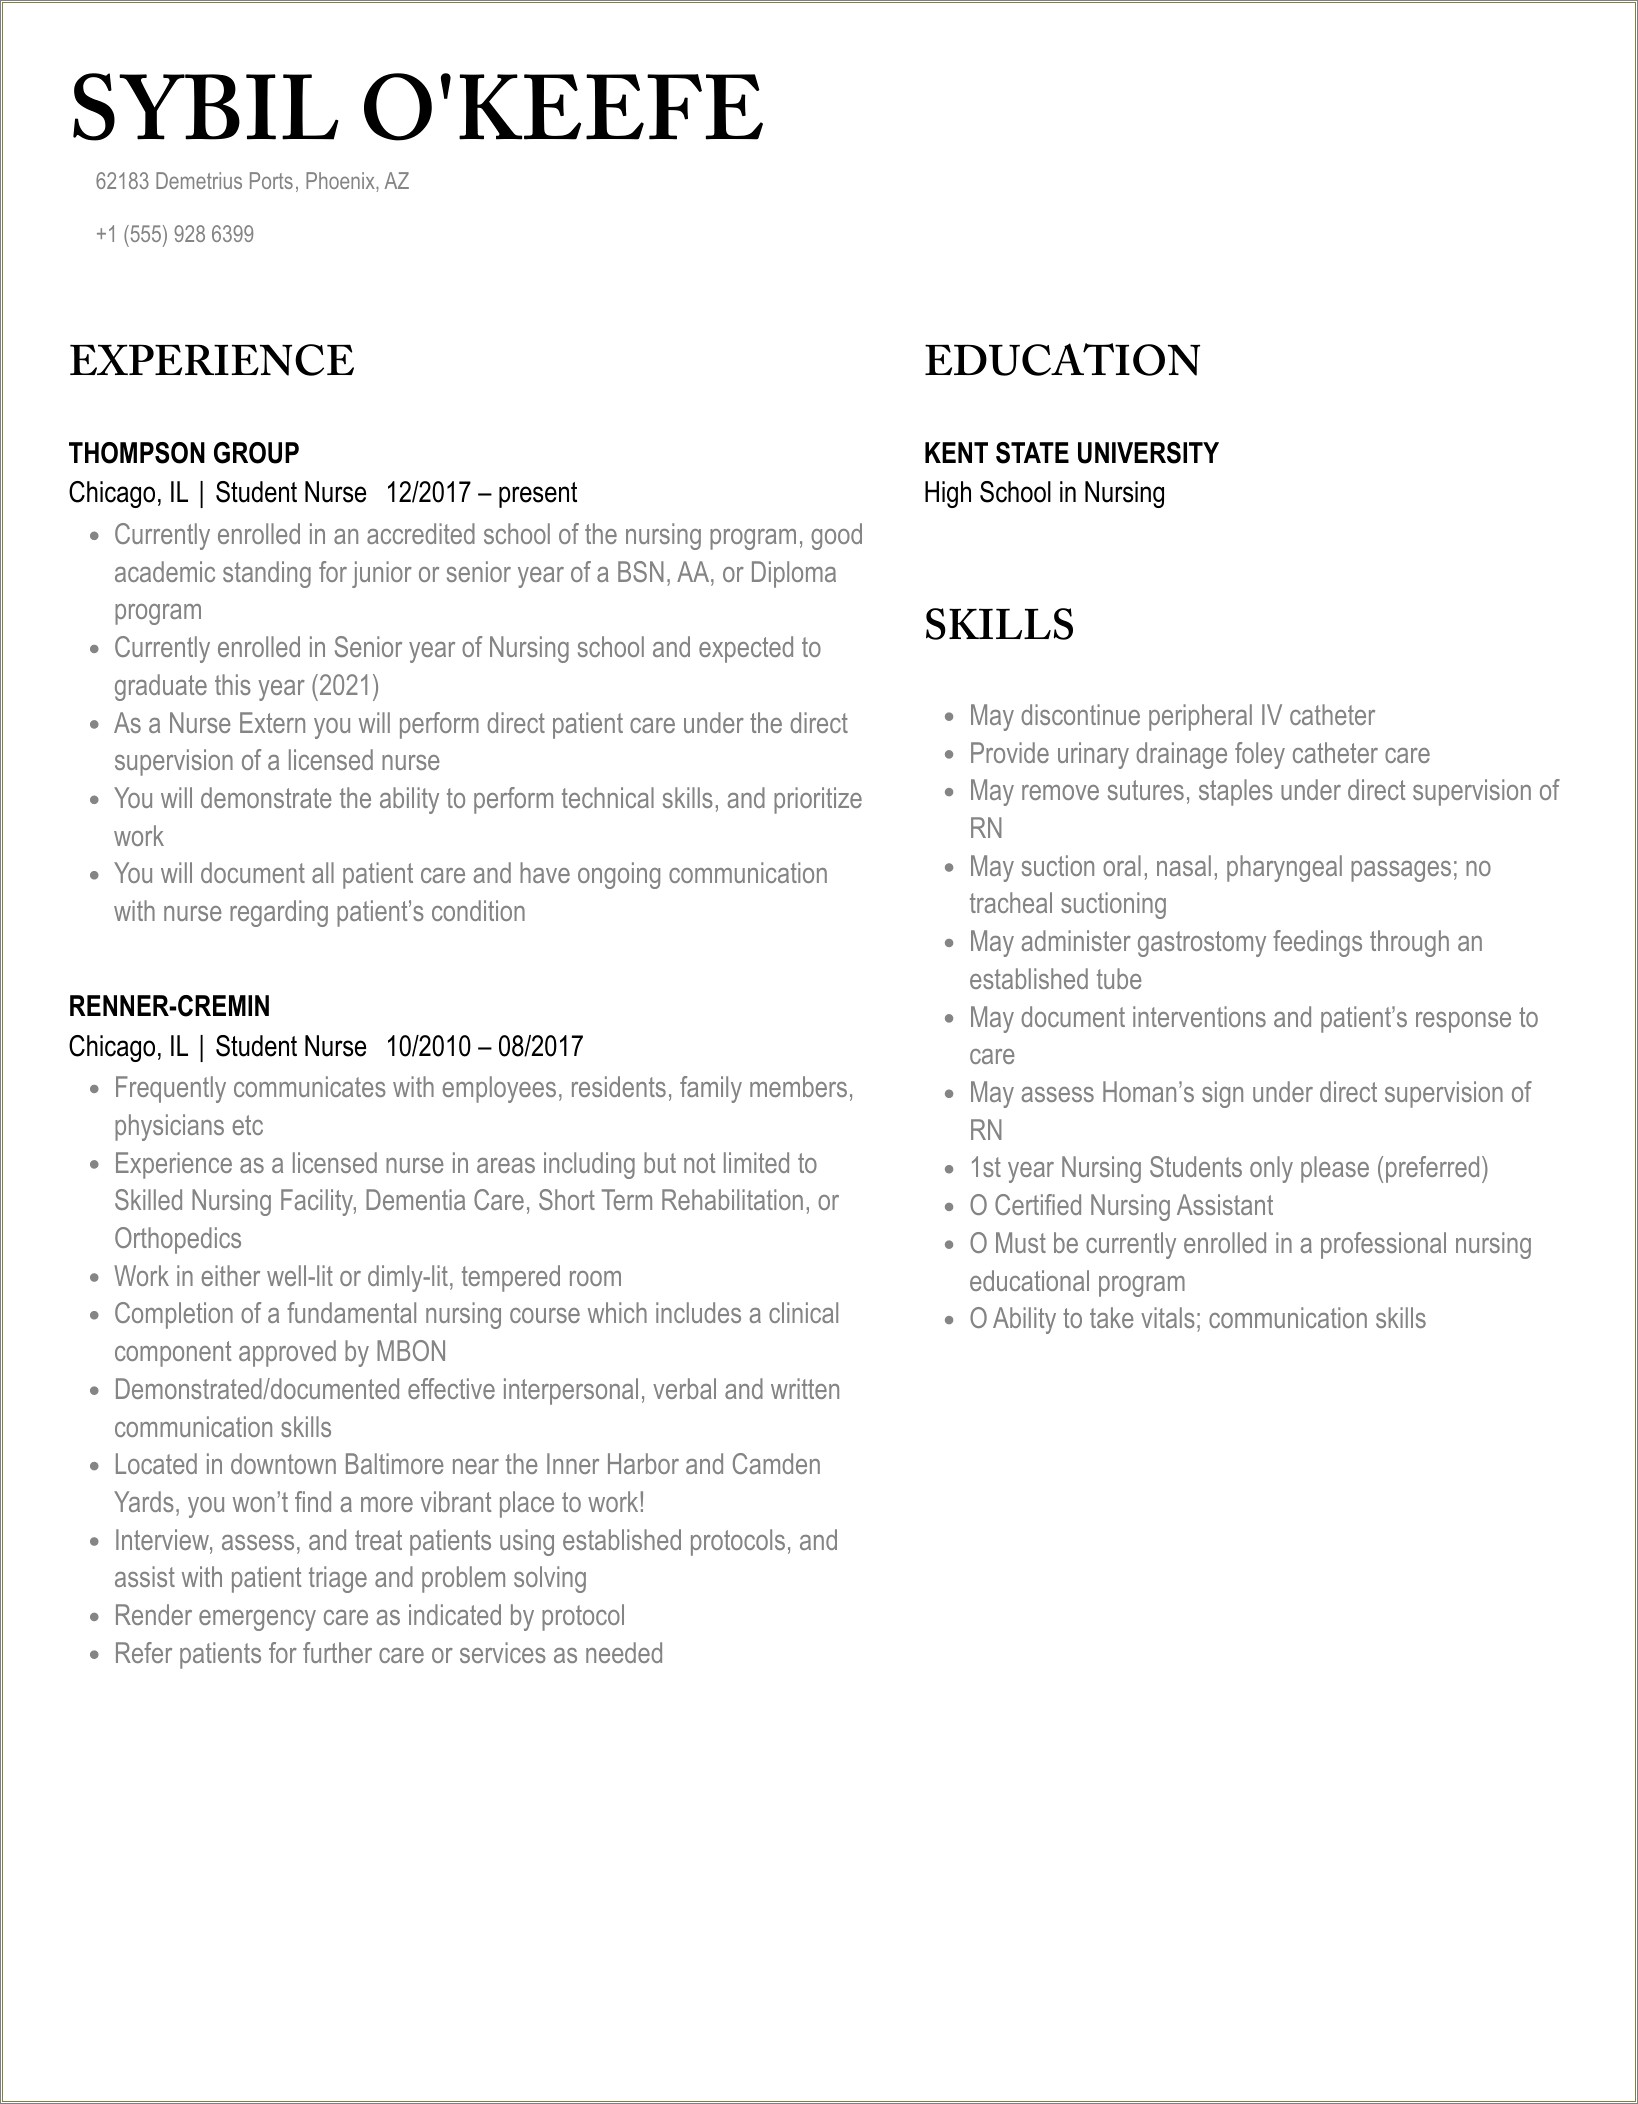 Current Nursing Student Resume With No Experience